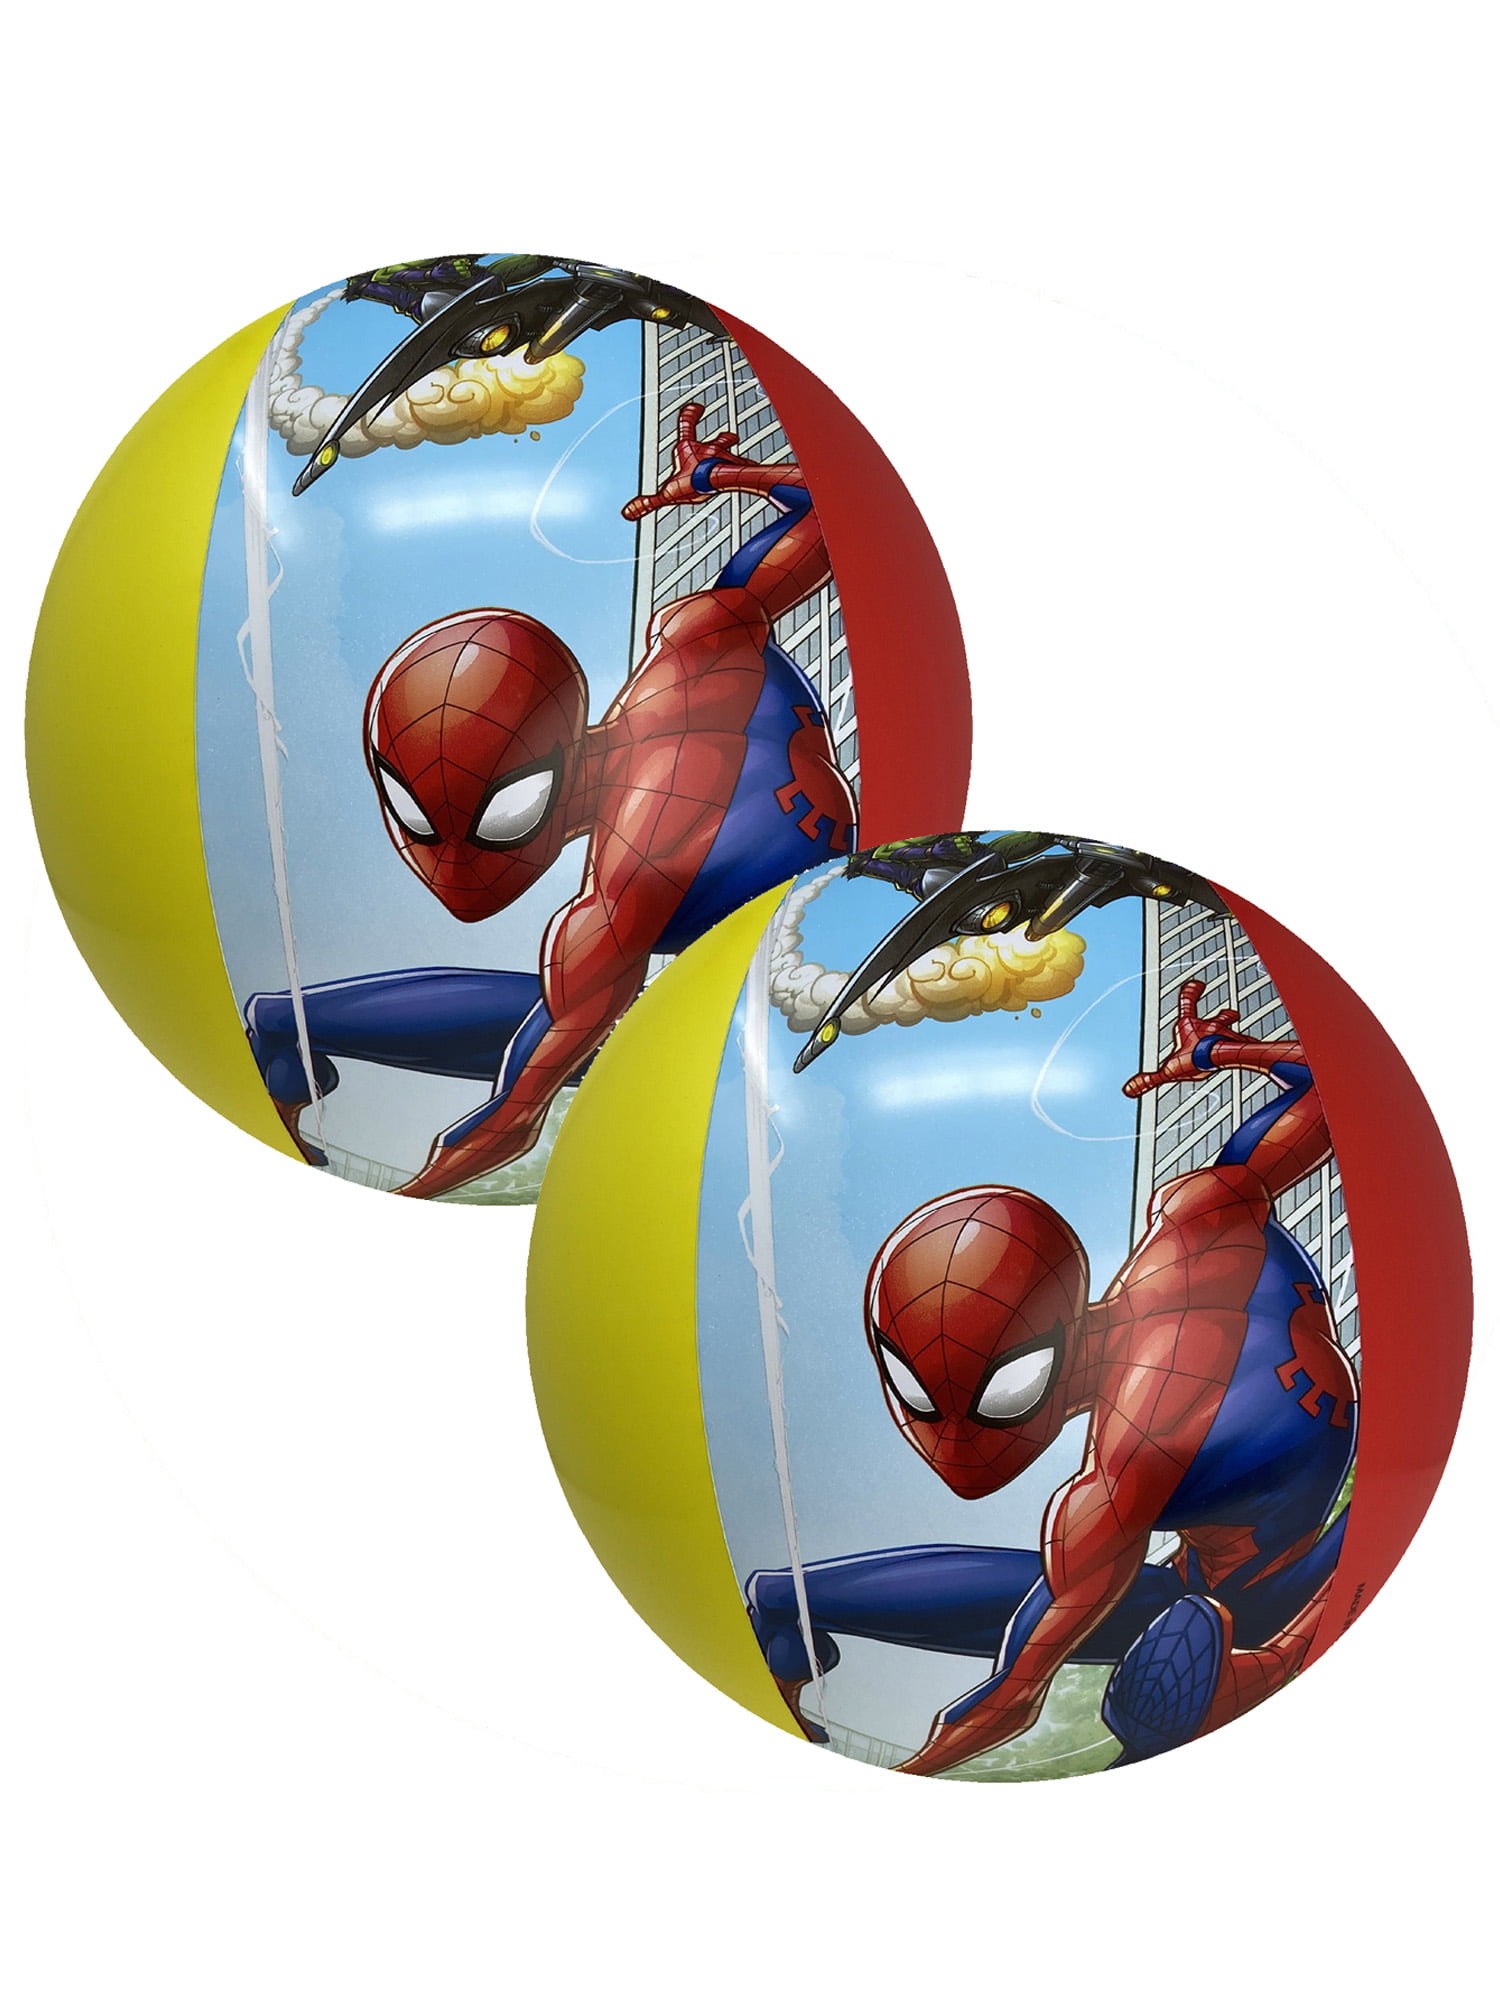 Marvel Ultimate Spiderman Inflatable Swimming Pool 36" Diameter Ages 3 for sale online 